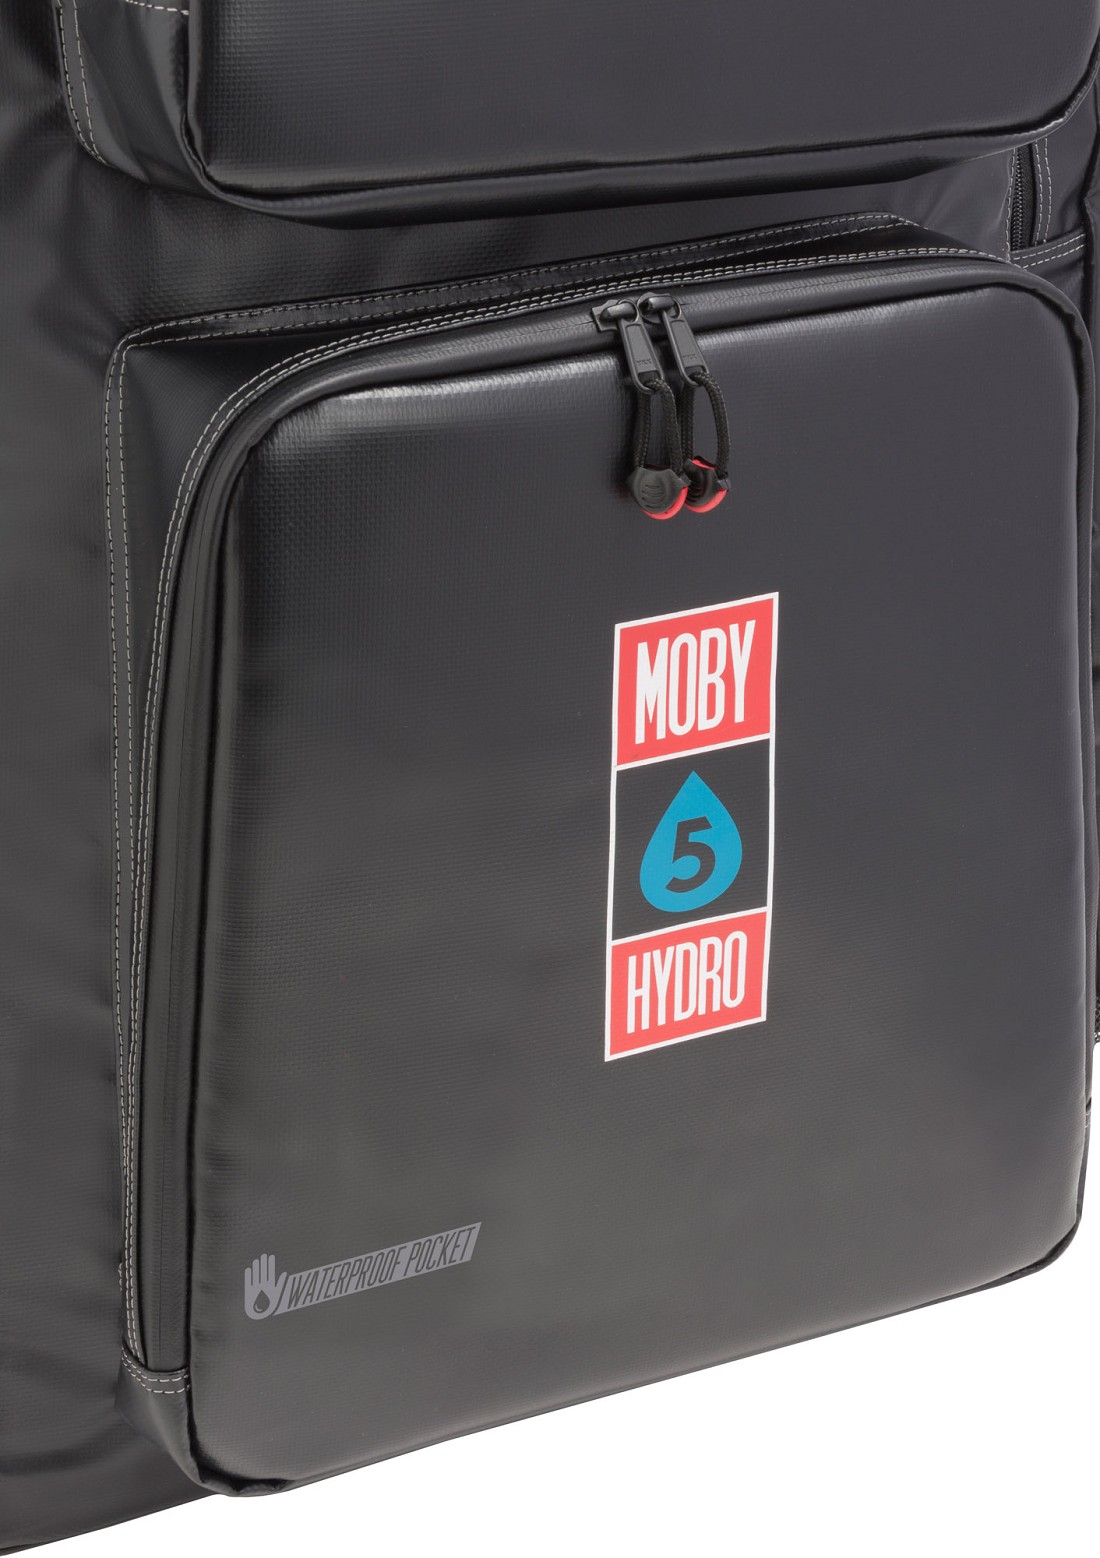 Moby 5 Hydro